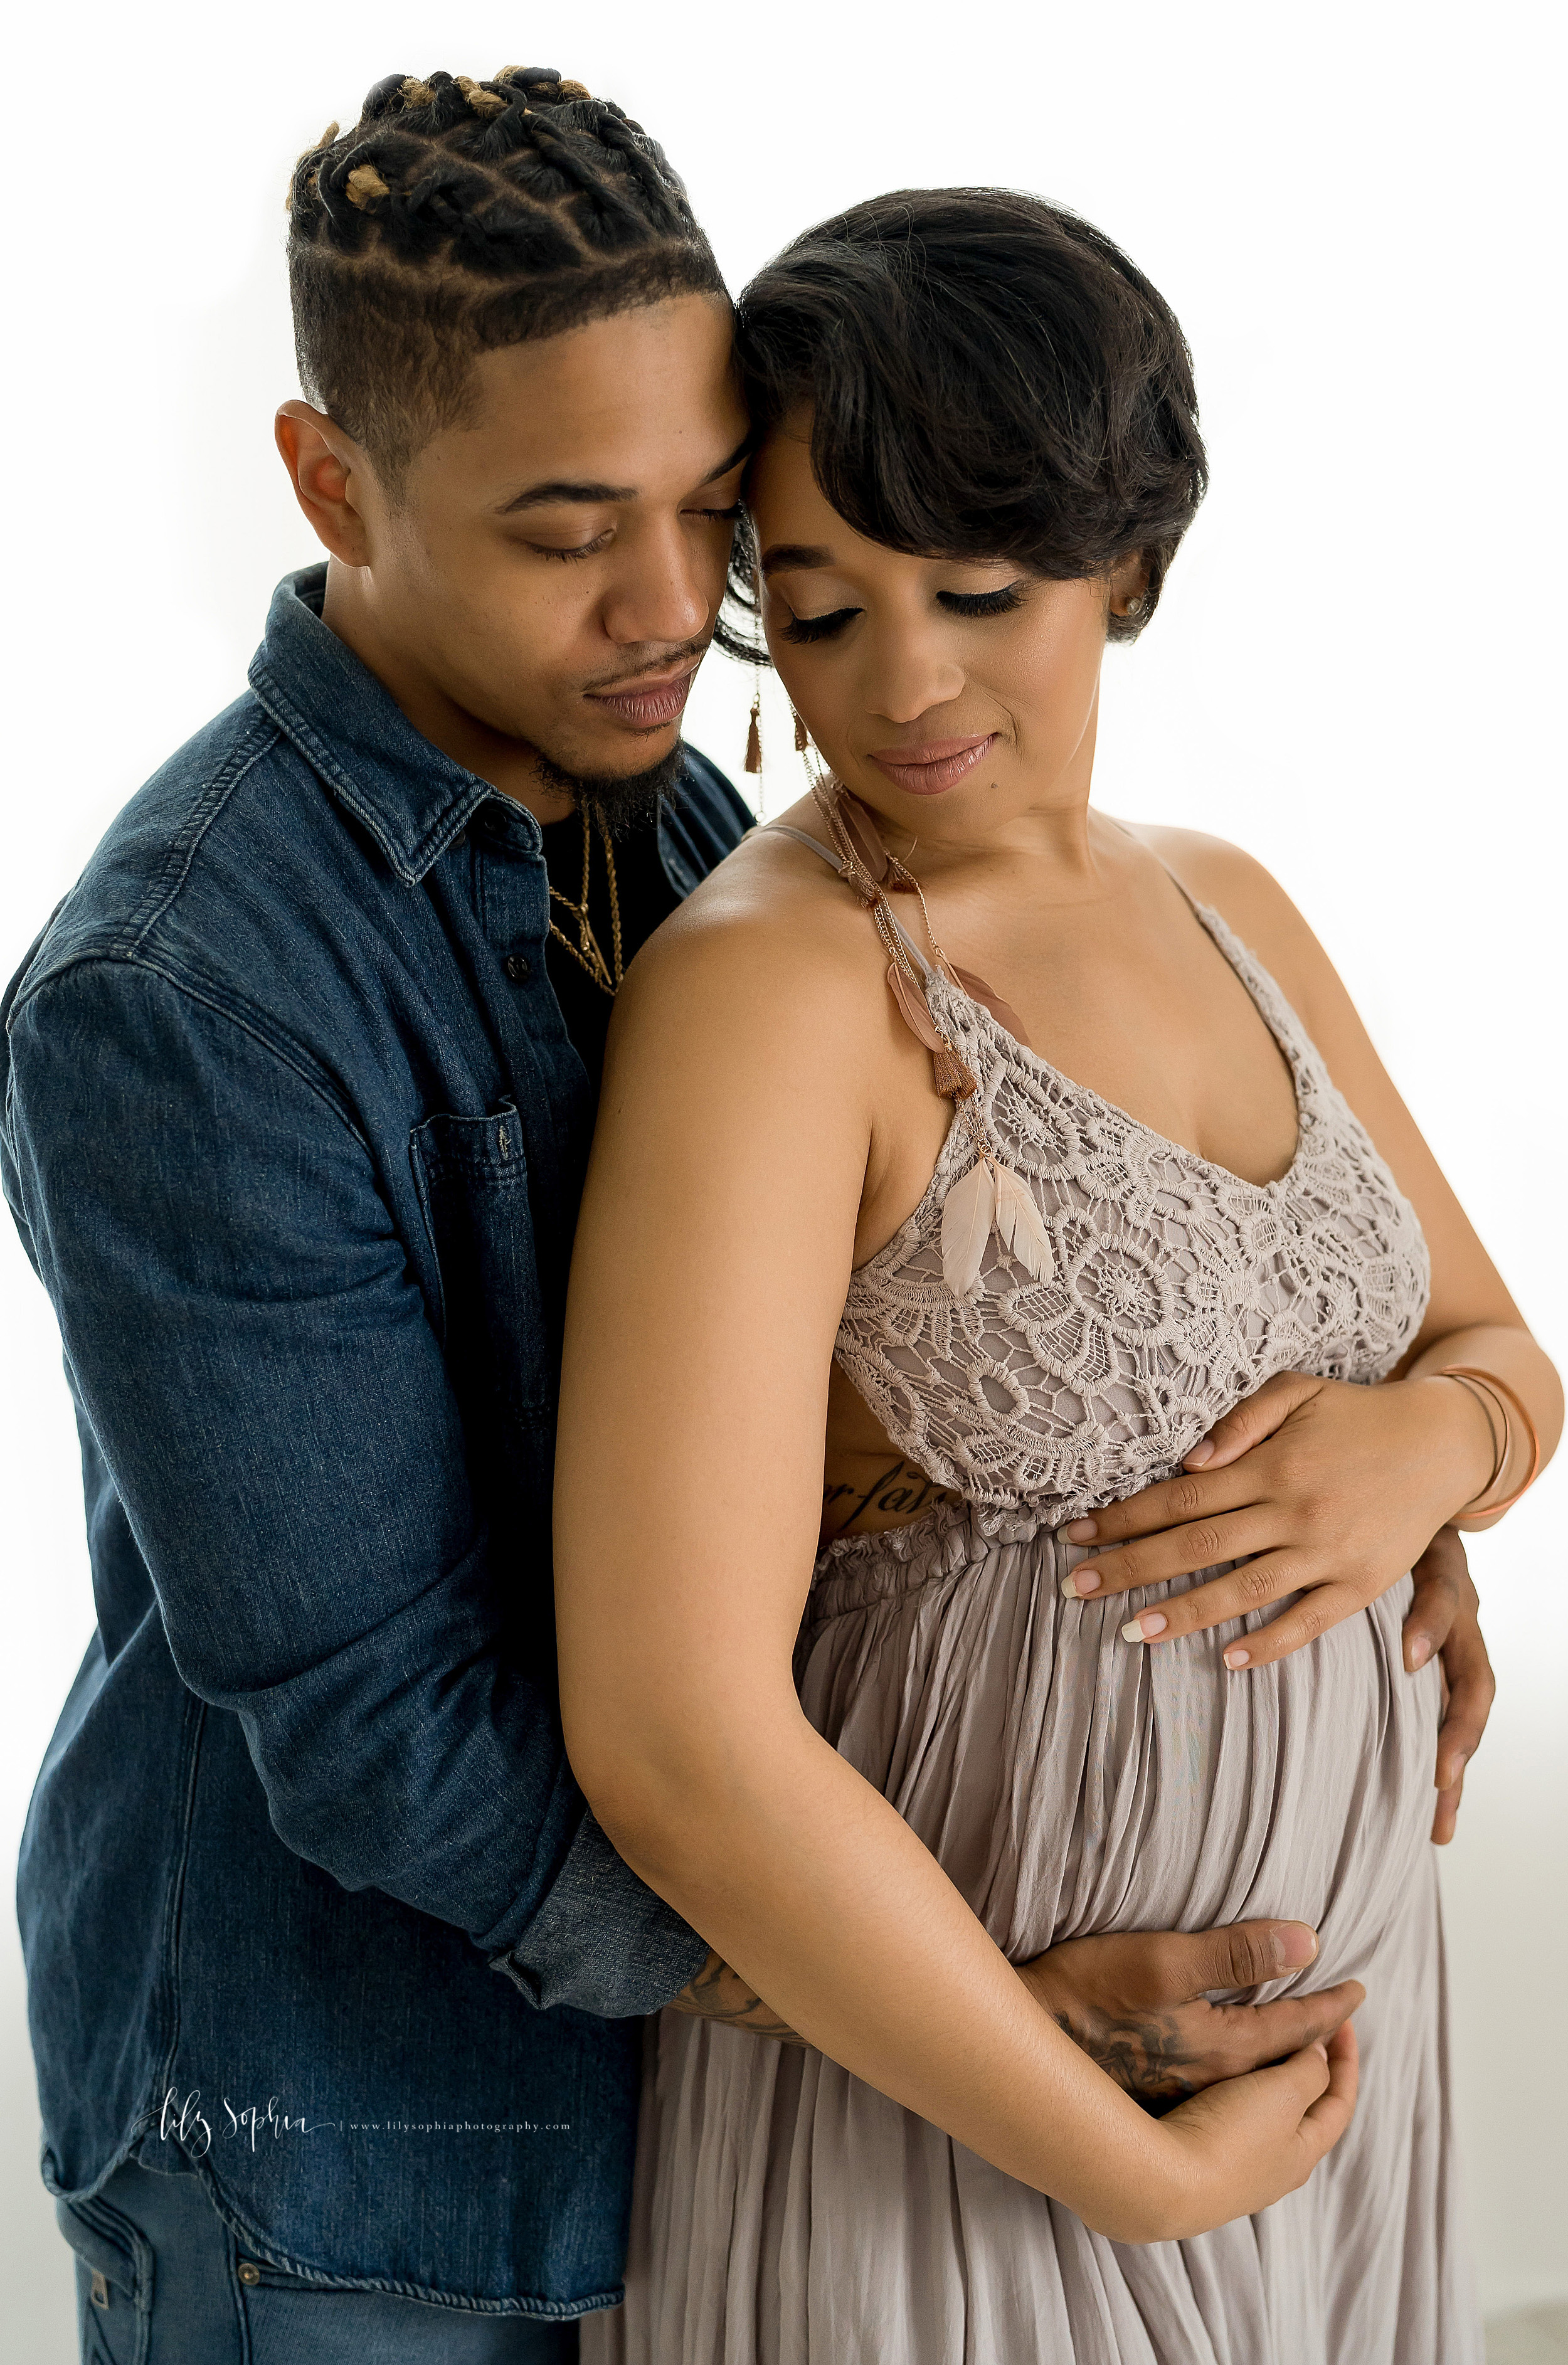  Maternity shoot of an African-American couple in an Atlanta studio with the woman standing in front of her husband as he embraces her from behind and the two of them embrace their child in utero in natural light. 